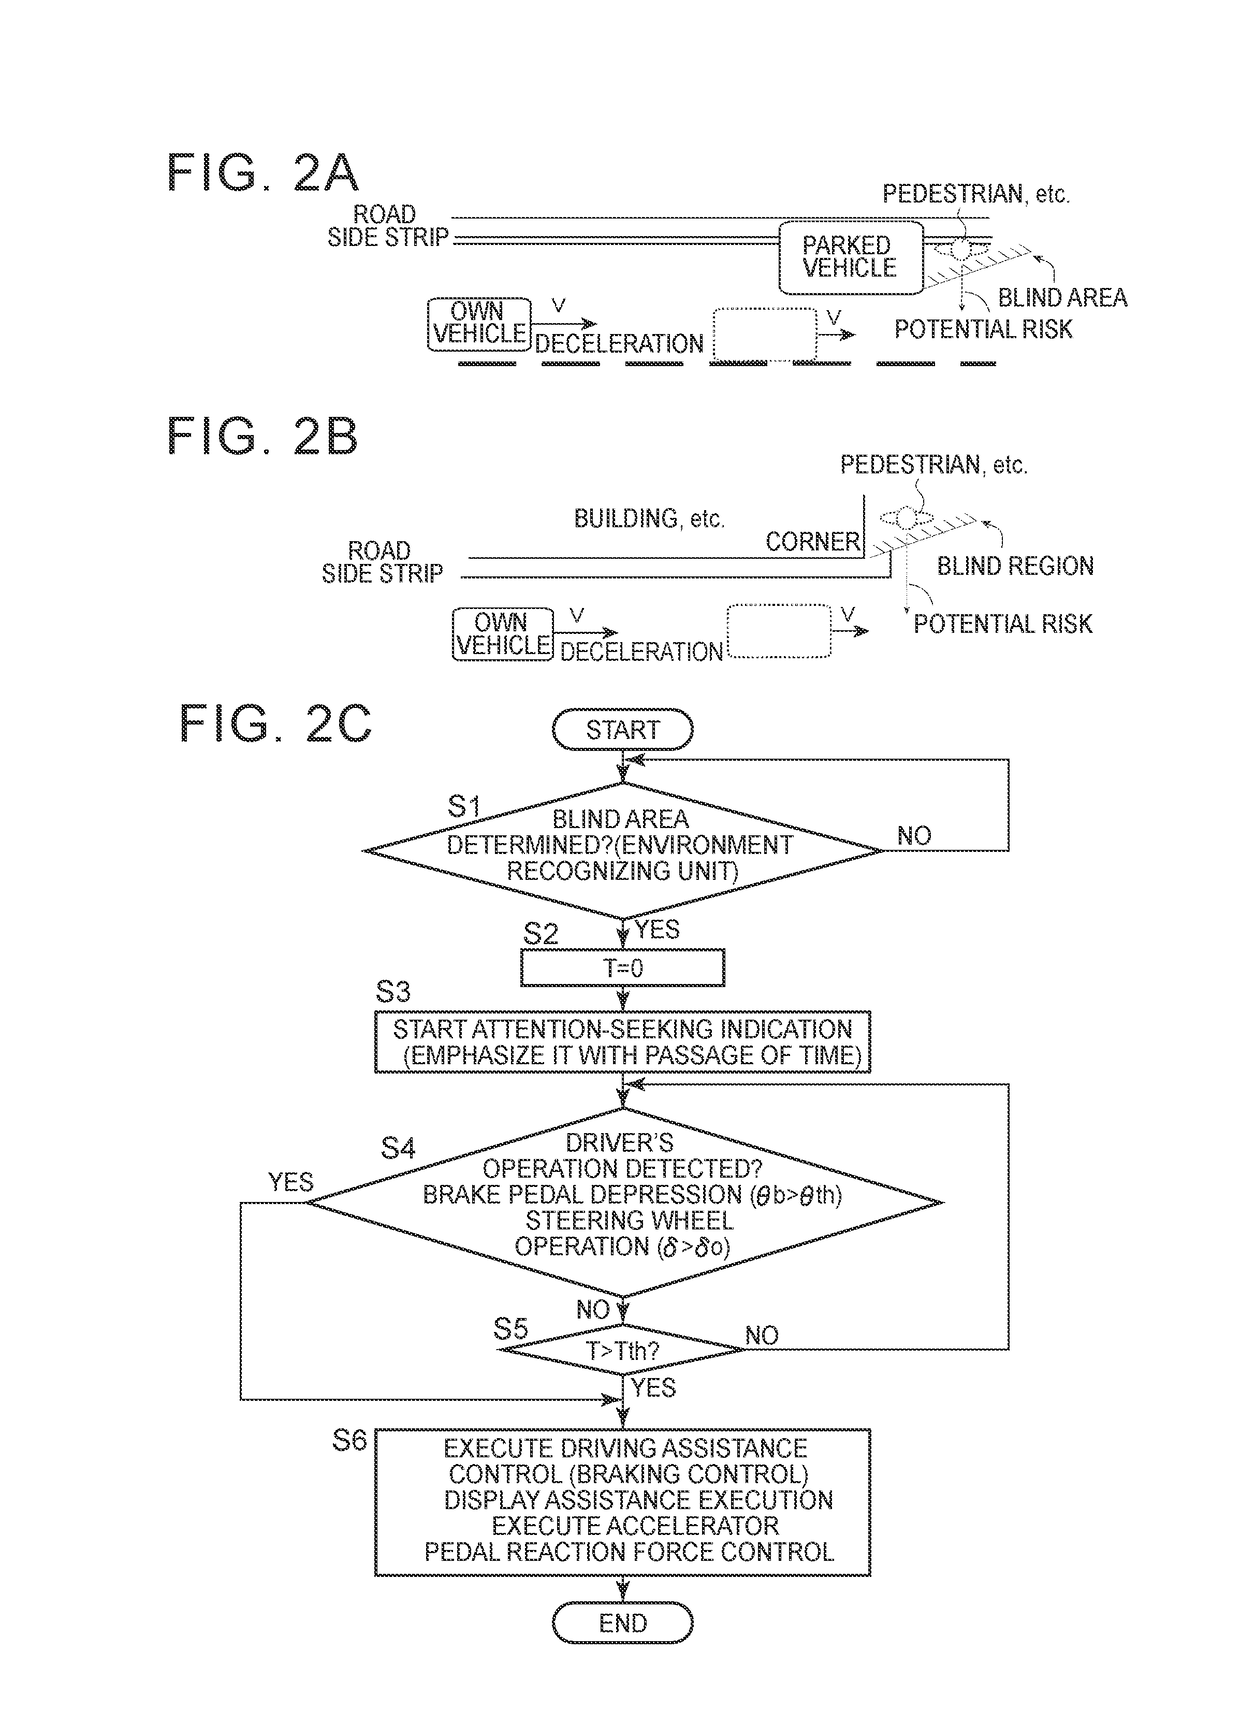 Driving assistance control apparatus of vehicle